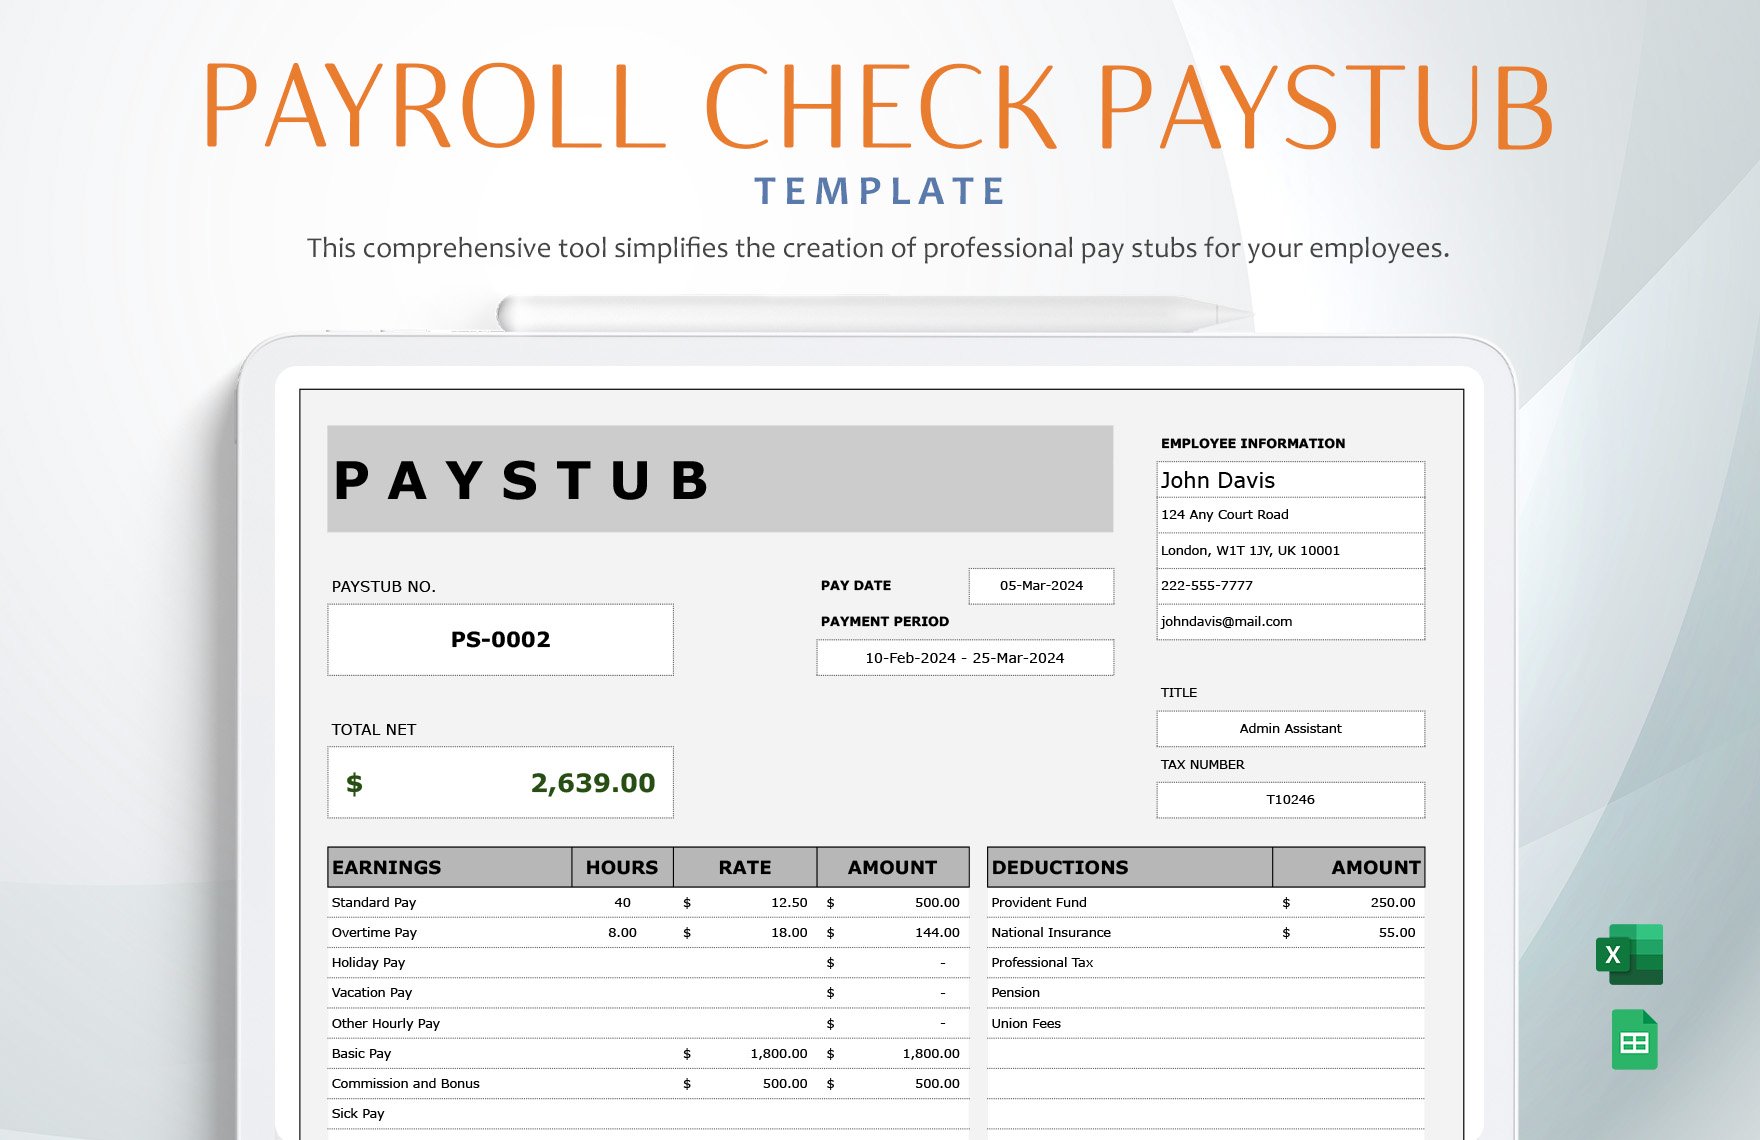 Payroll Check Paystub Template in Excel, Google Sheets